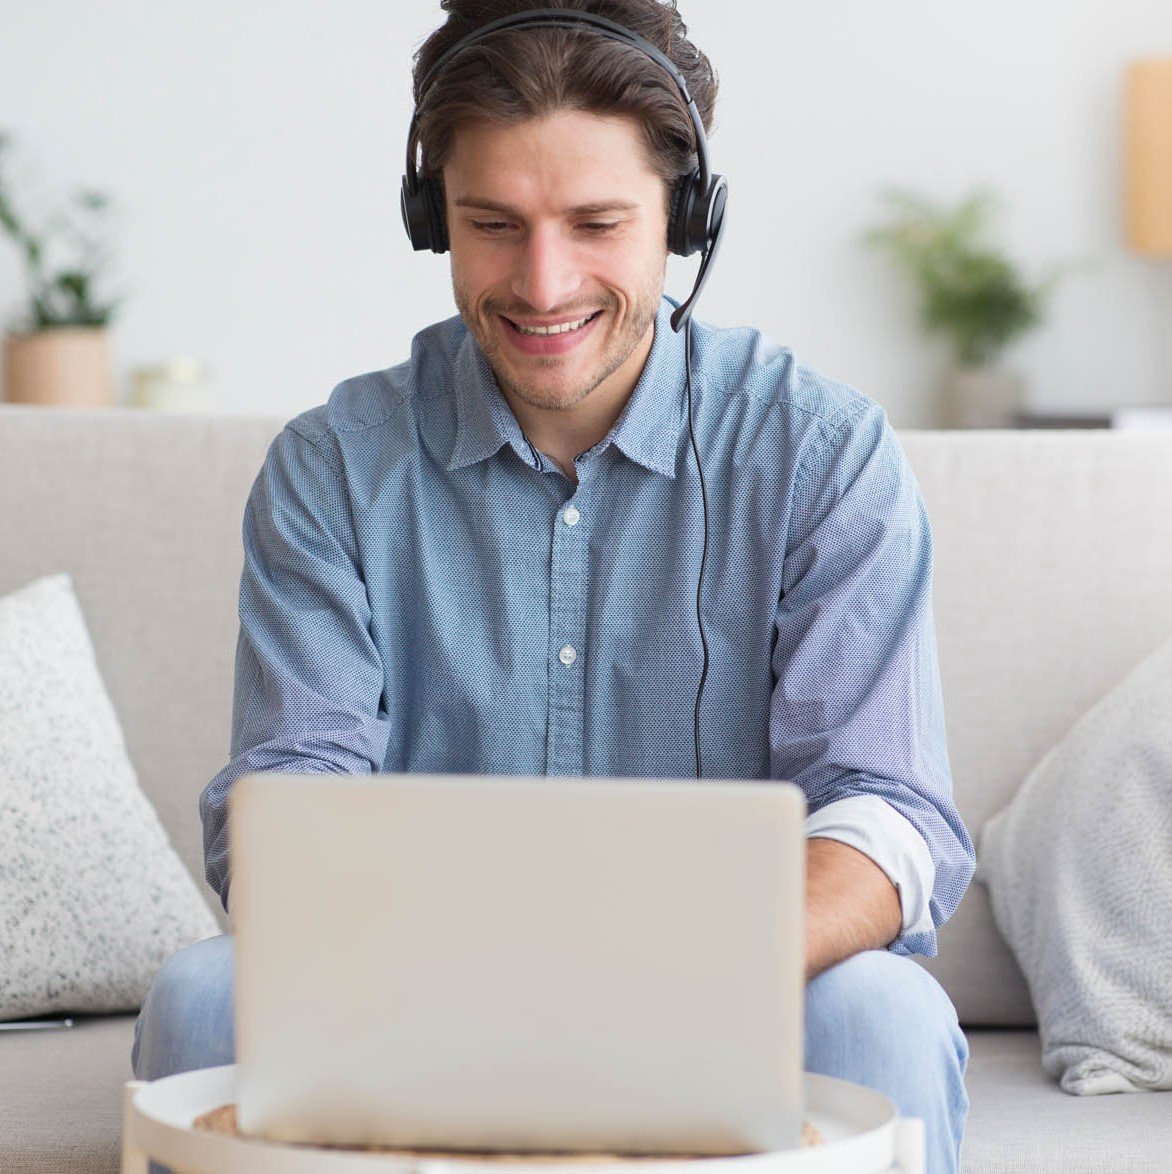 Young man sitting on a sofa with headphones smiling at his laptop screen